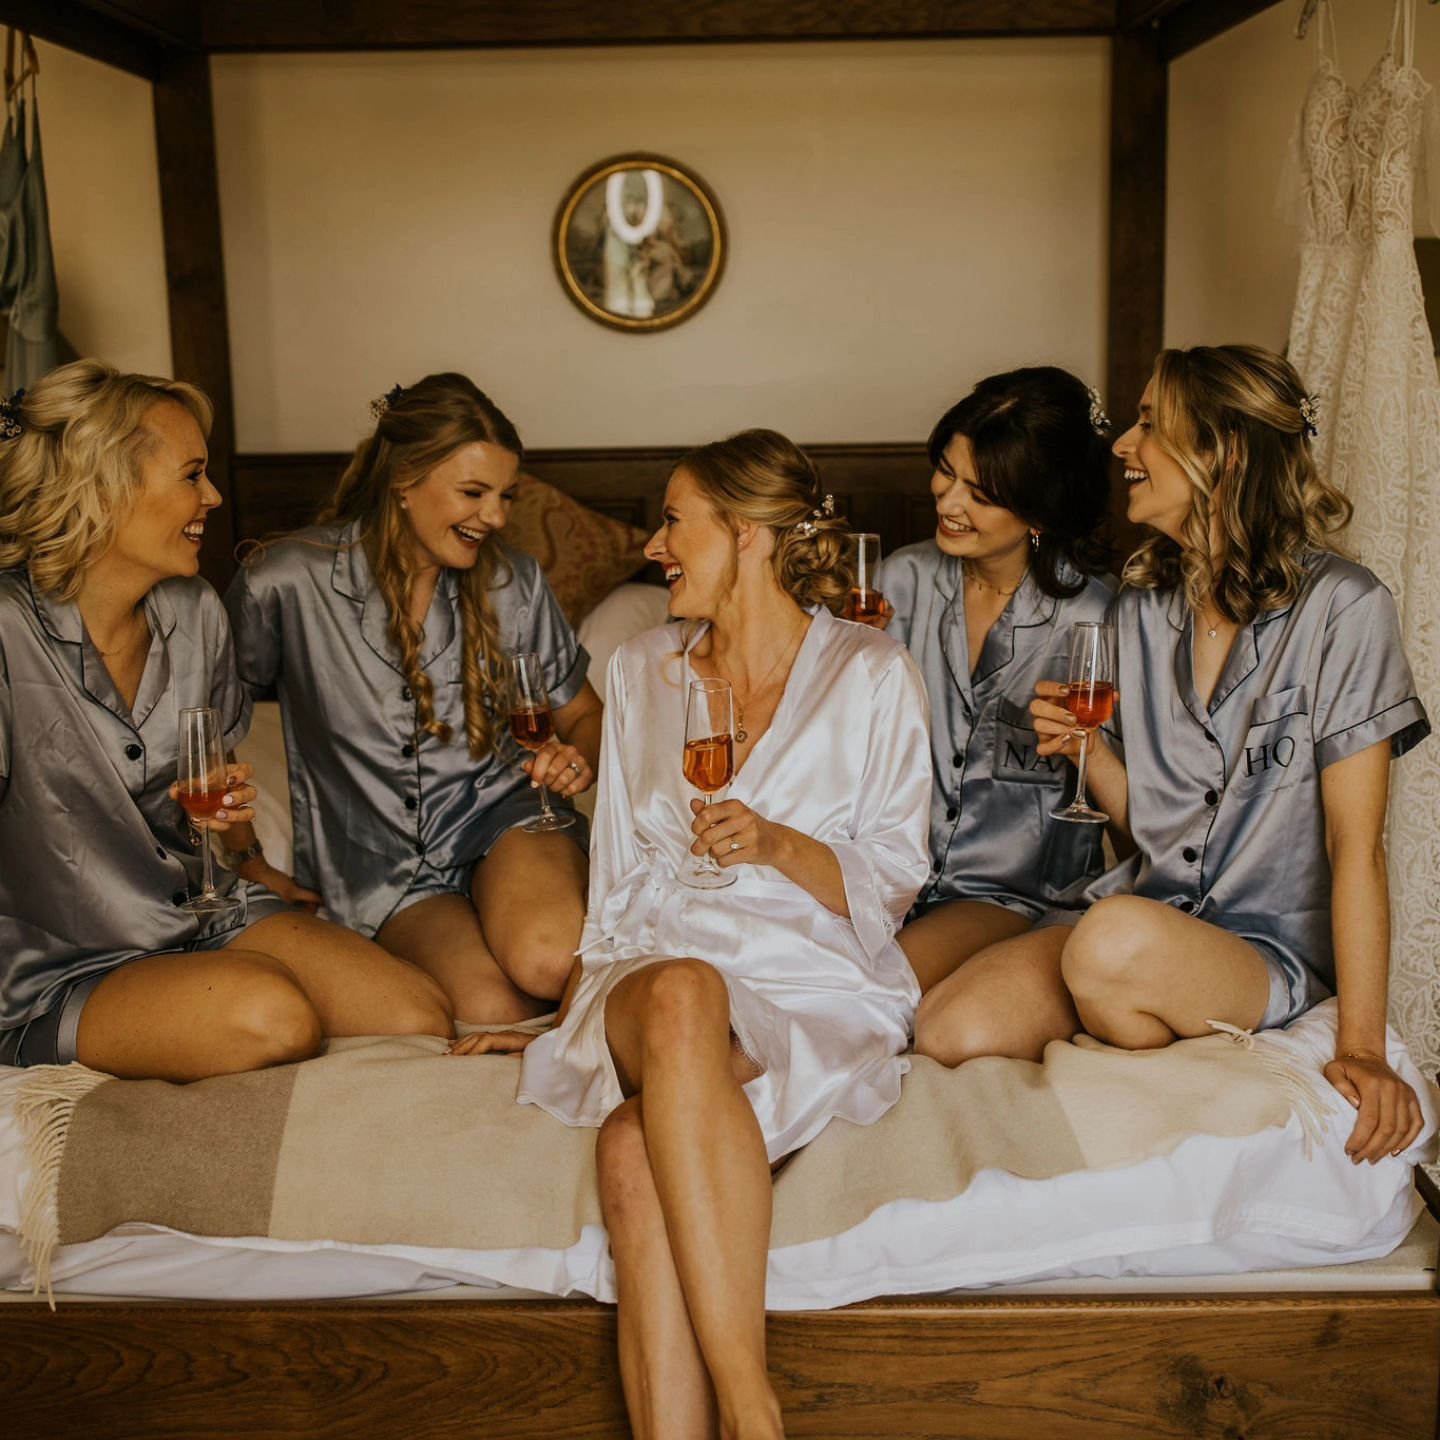 B R I D E  T R I B E ! 💕

There's nothing like the energy in the bridal suite the morning of your wedding day! 💕

With all your friends and family surrounding you, relax and enjoy every moment before you walk down the alise!💕

📸 credit: @auroragr